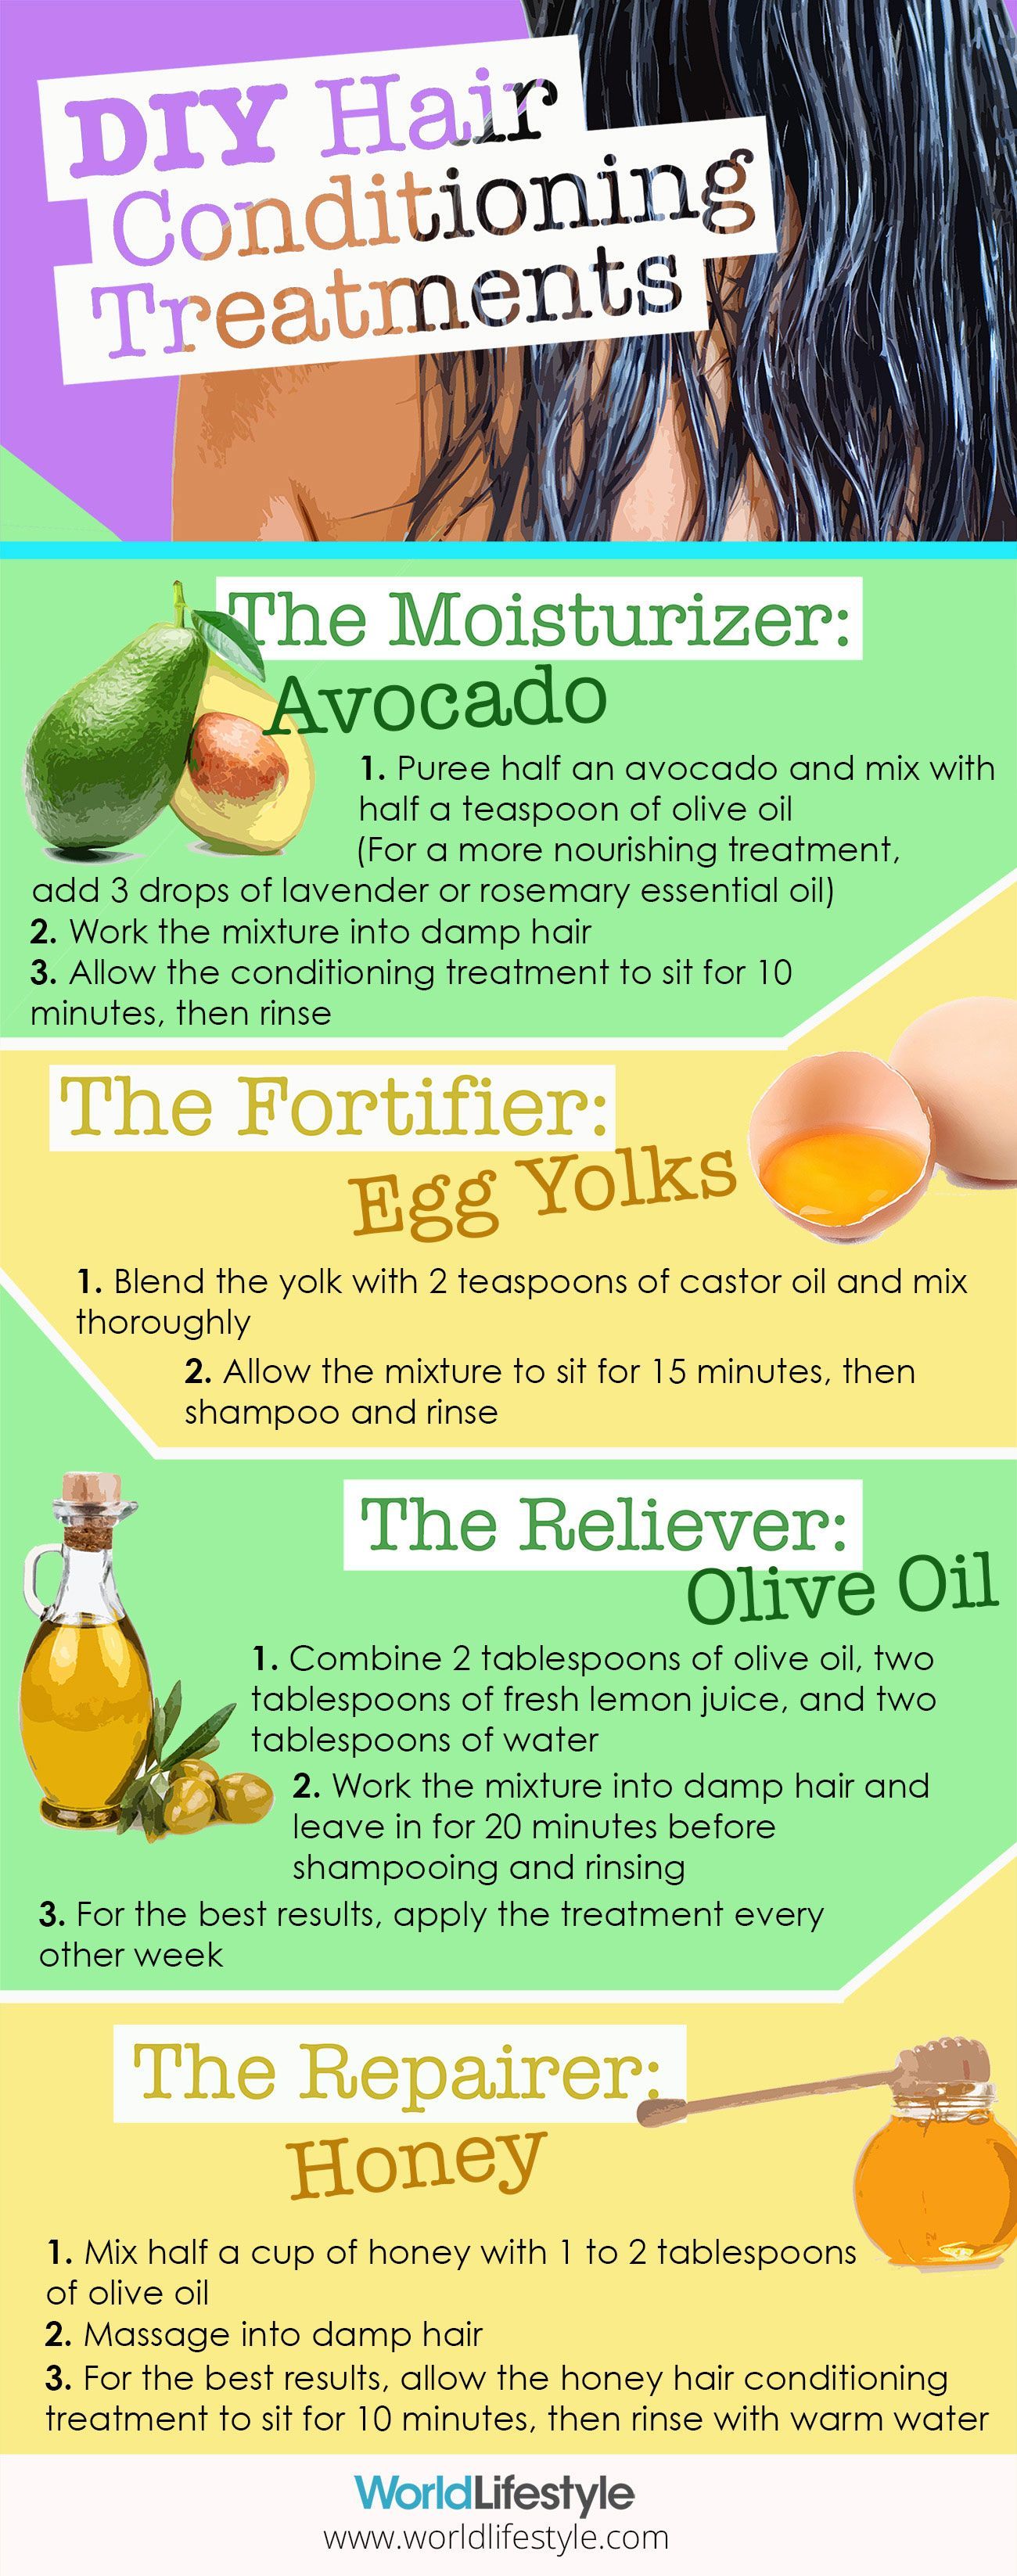 4 Awesome DIY Hair Conditioning Treatments to strengthen, moisturize, repair damage, and relieve itchy scalp